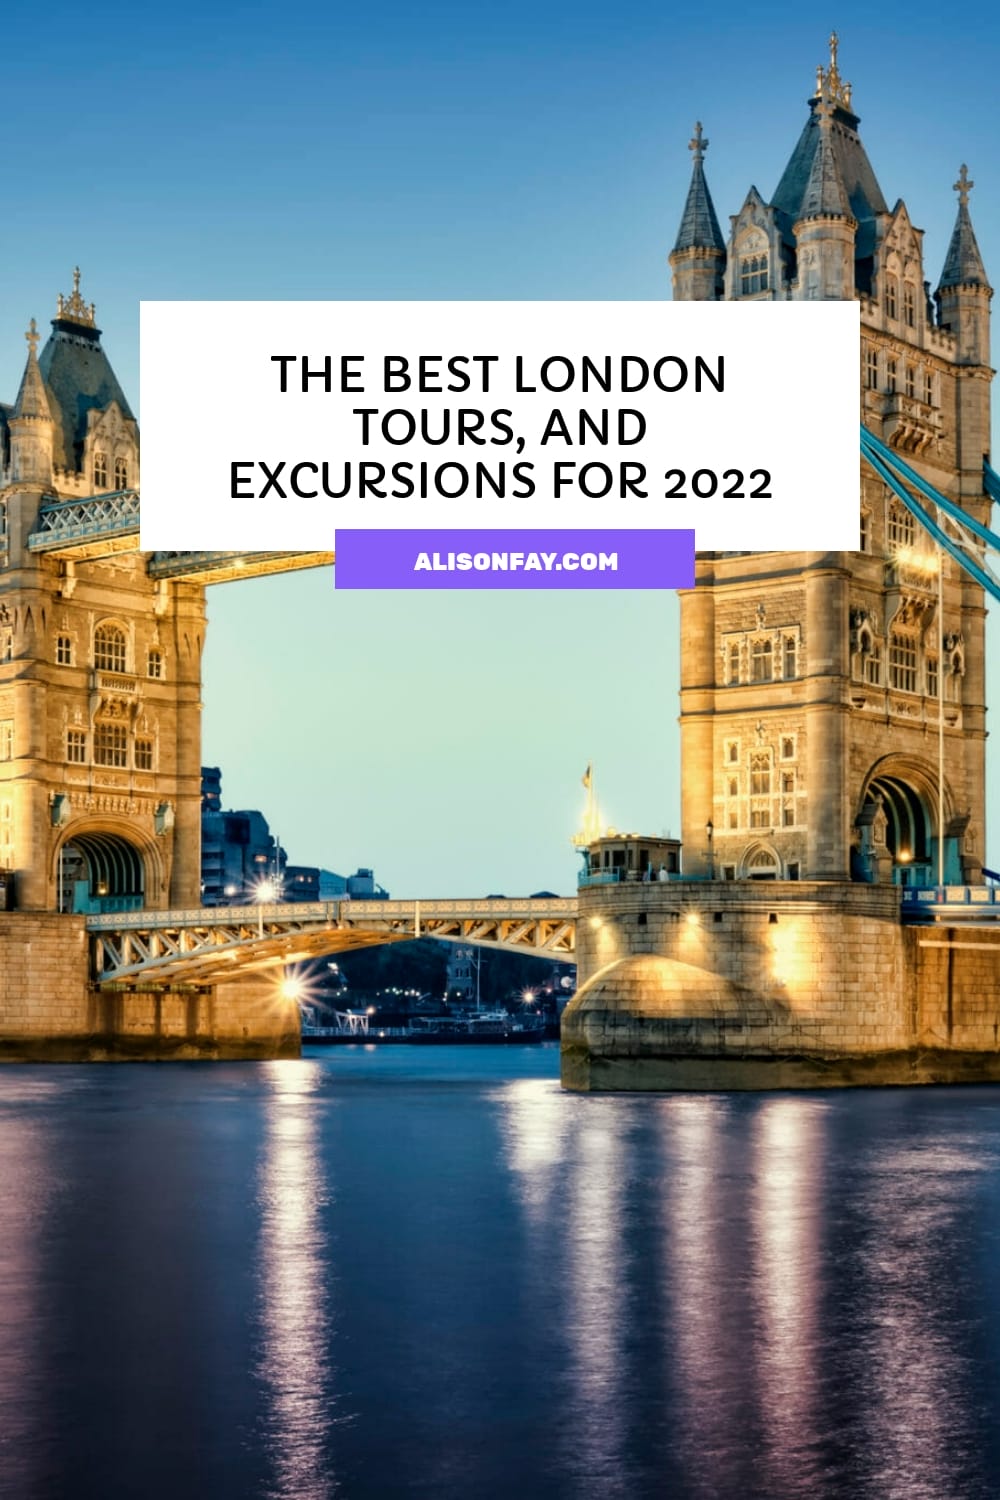 The Best London Tours, and Excursions for 2022